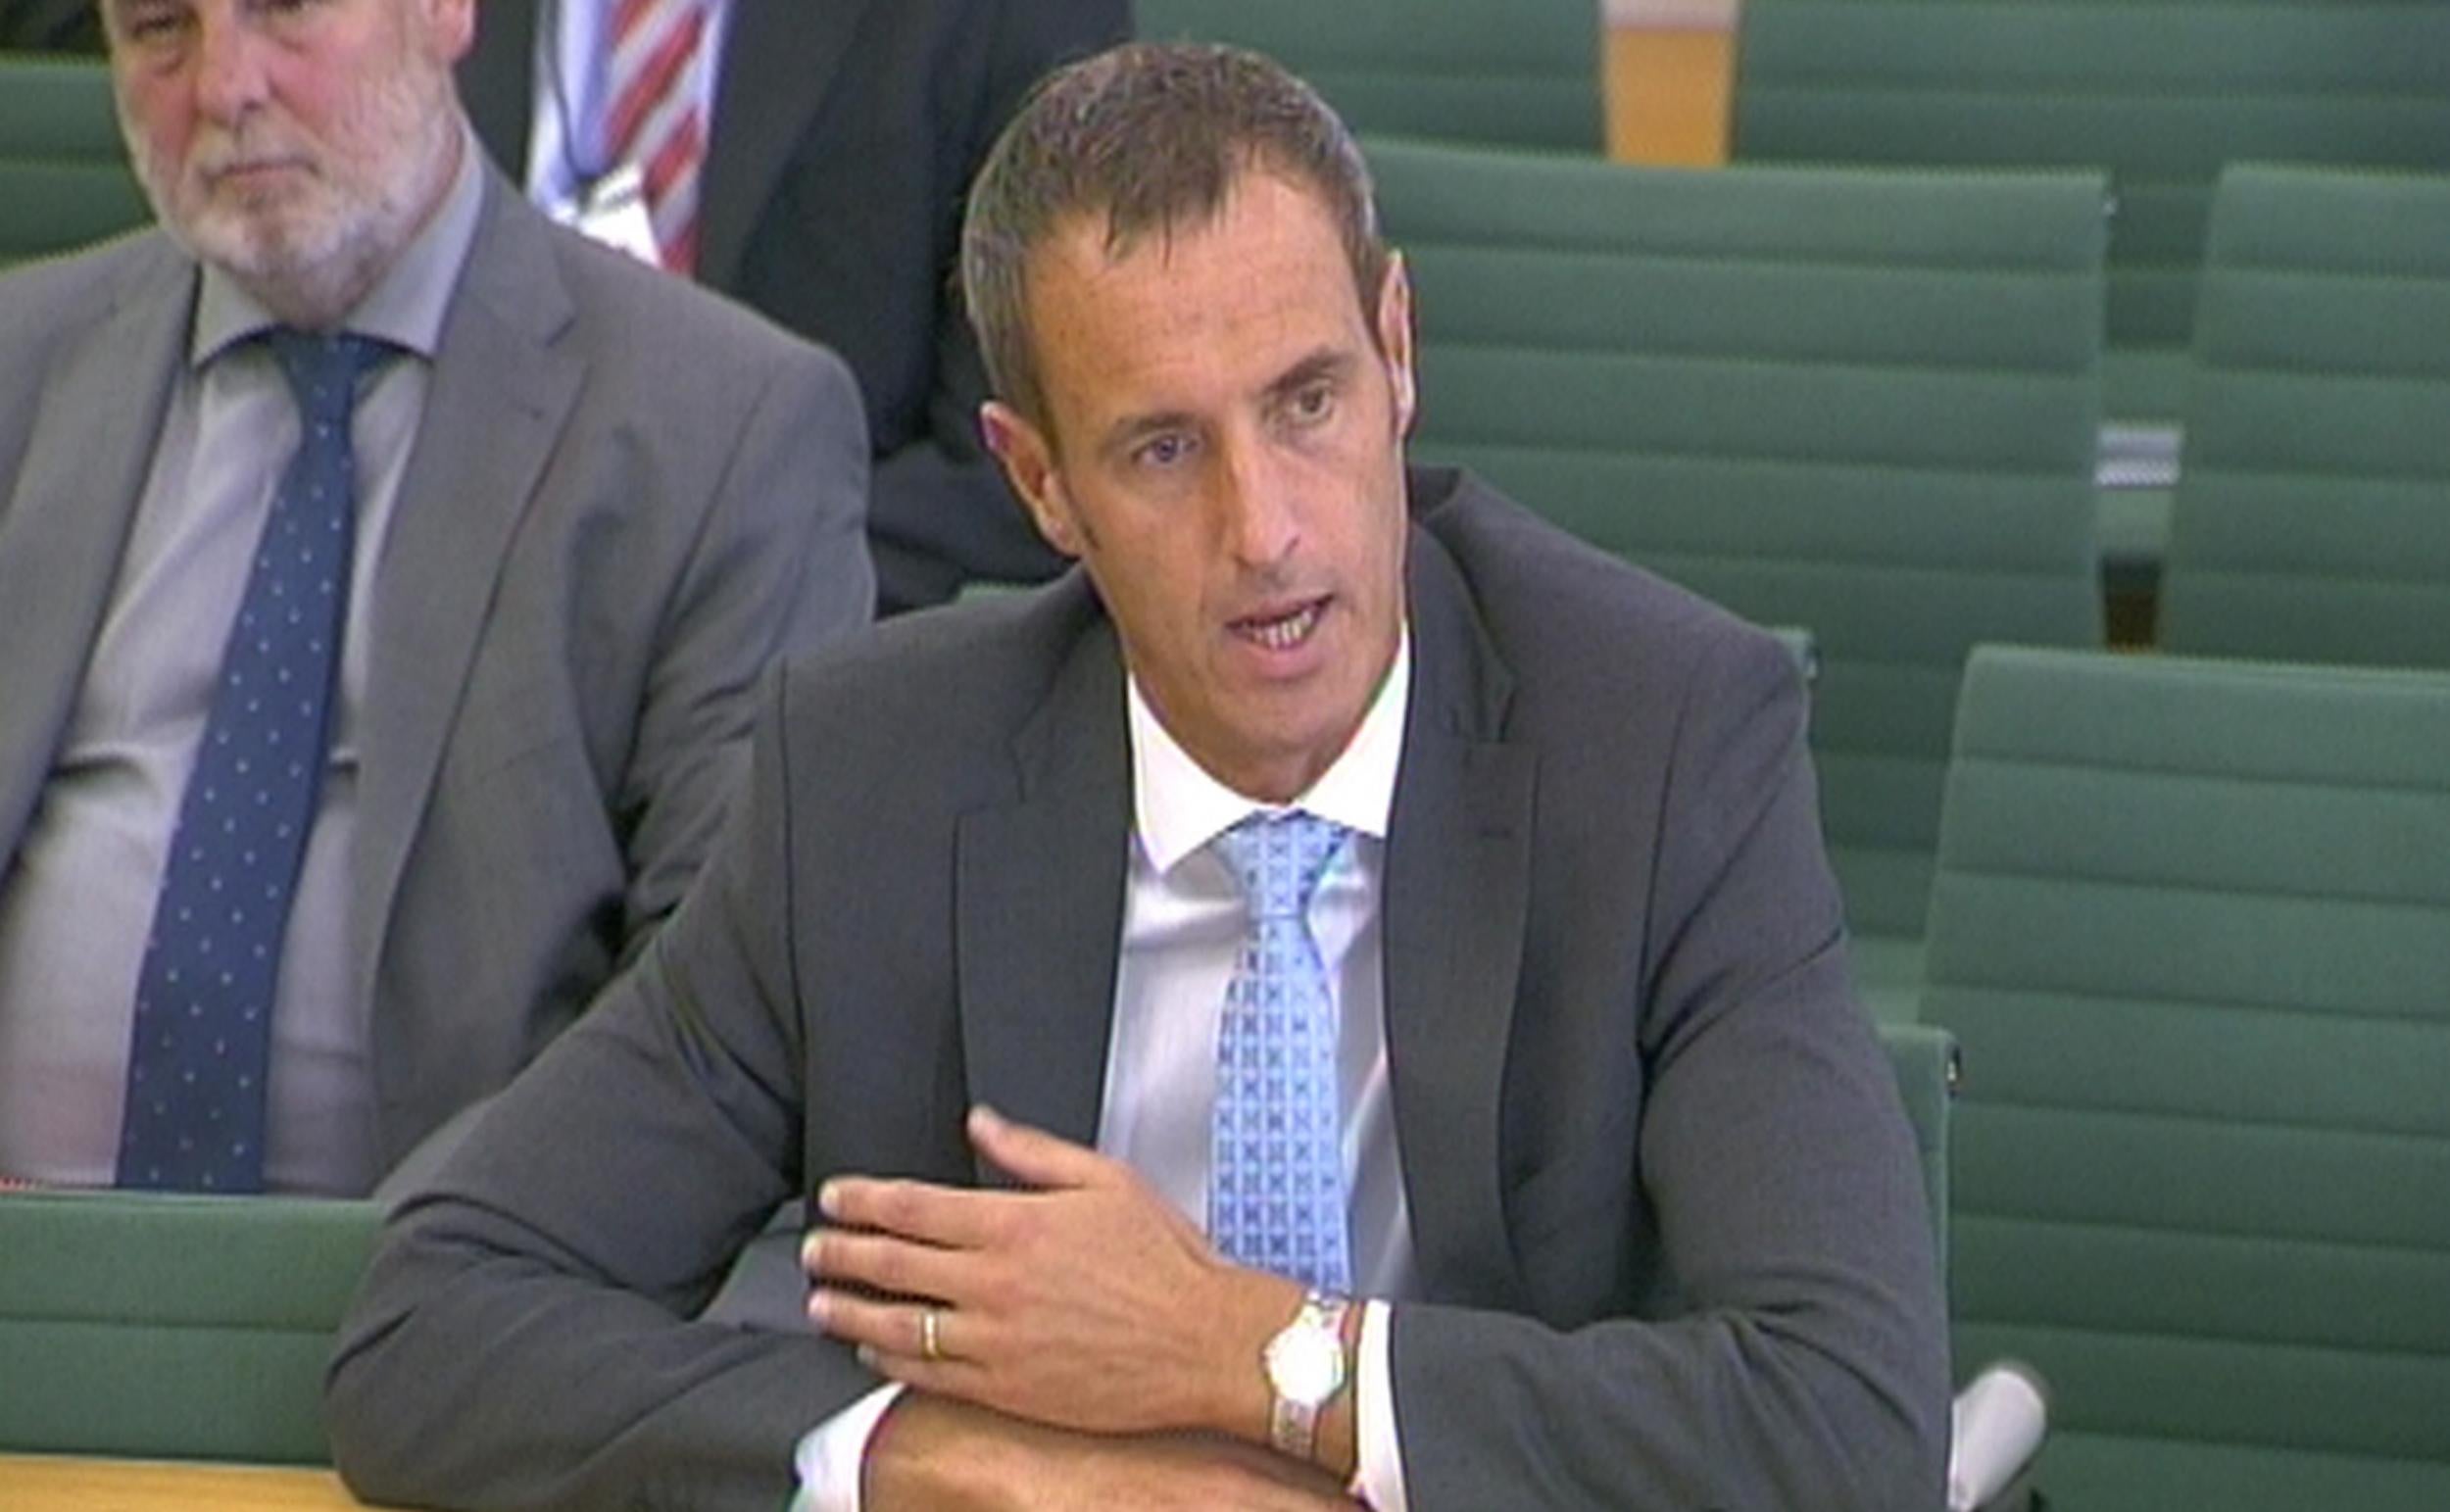 Europol chief Rob Wainwright told MPs that Britain was critical to the 'evolution' of Europol